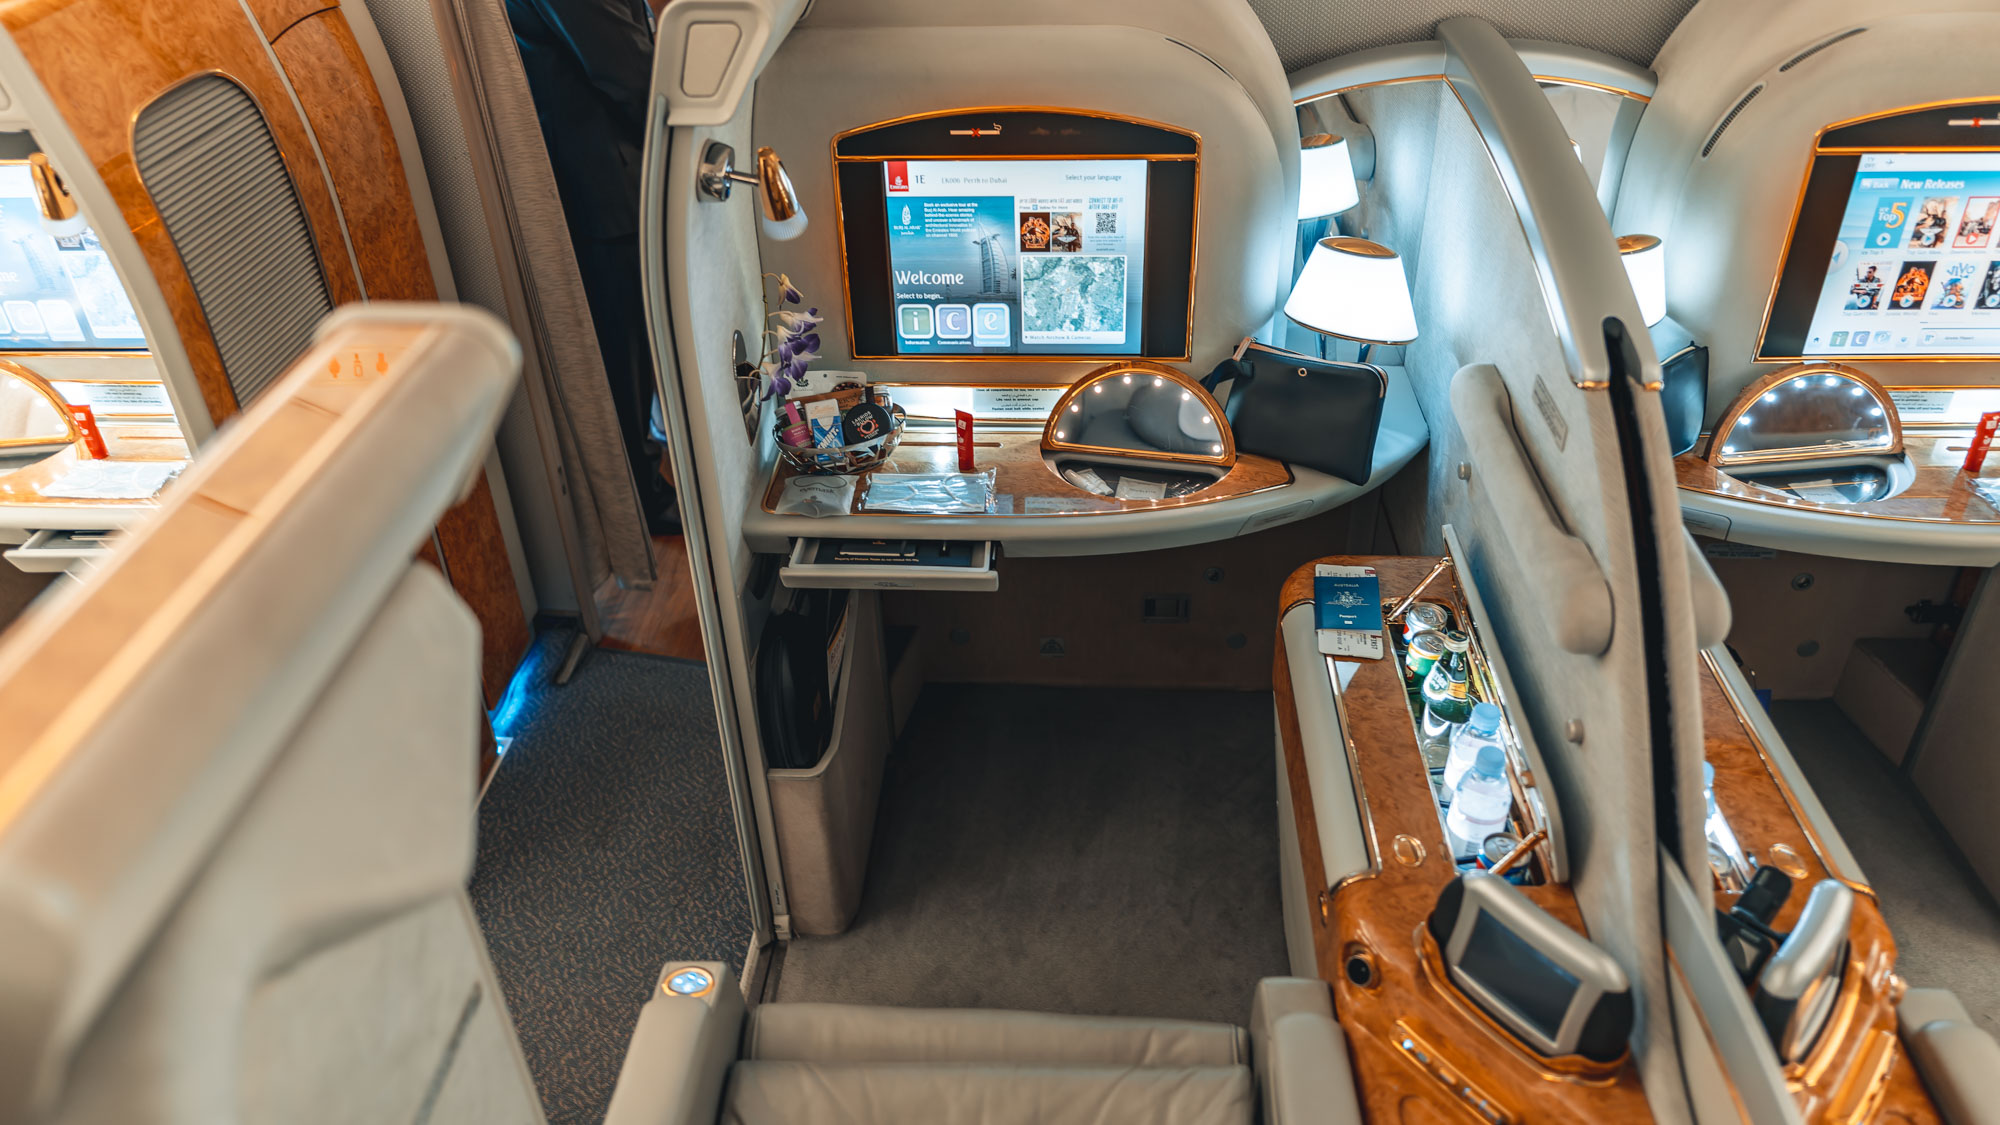 Emirates Boeing 777 First class seat overview